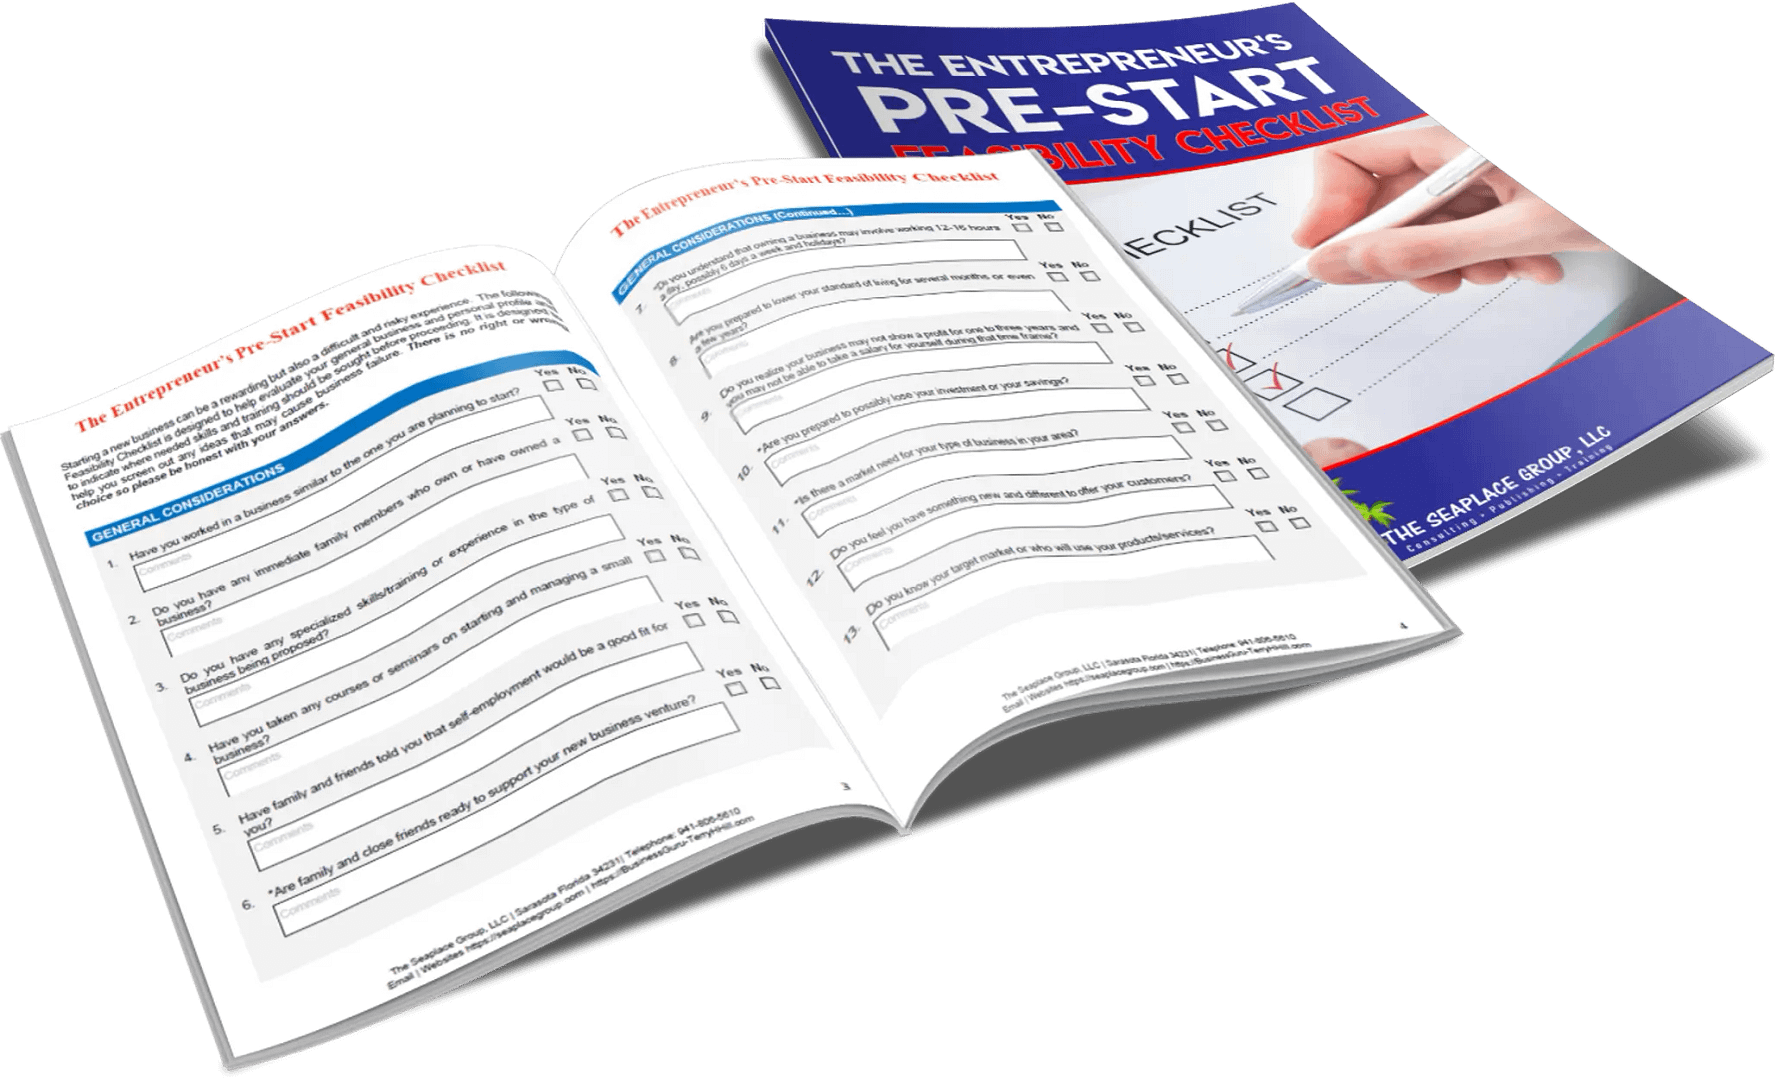 Pre-Start Feasibility Checklist-workbook is designed to help you screen out any ideas that may cause business failure